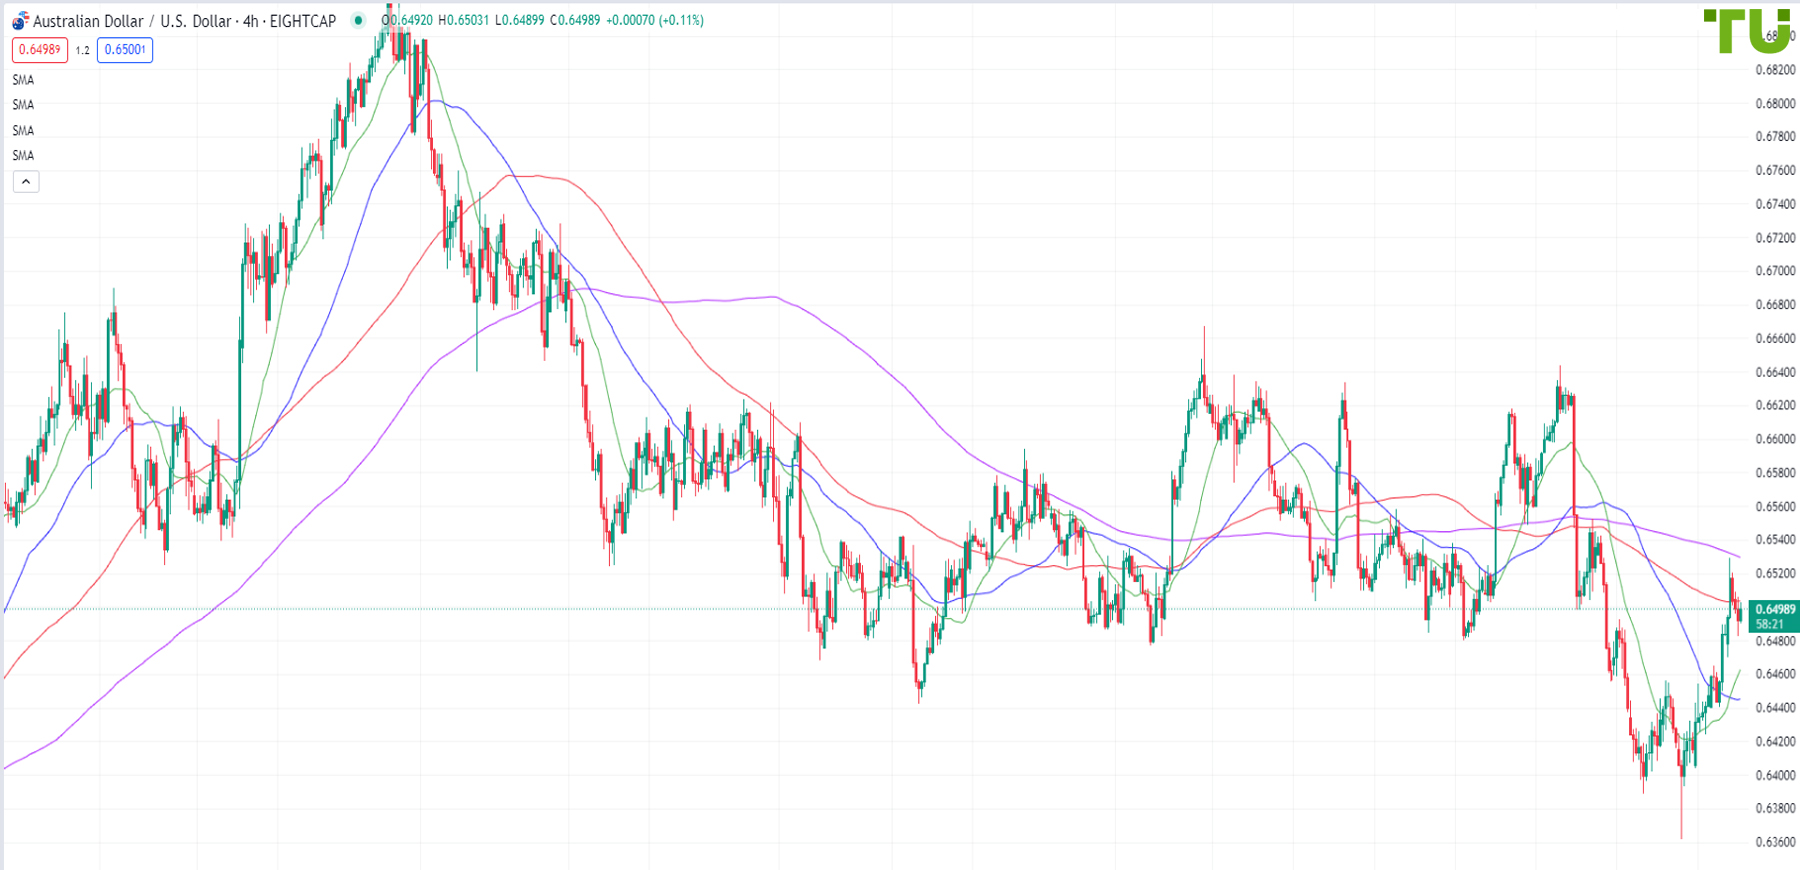 AUD/USD is under moderate pressure after rise